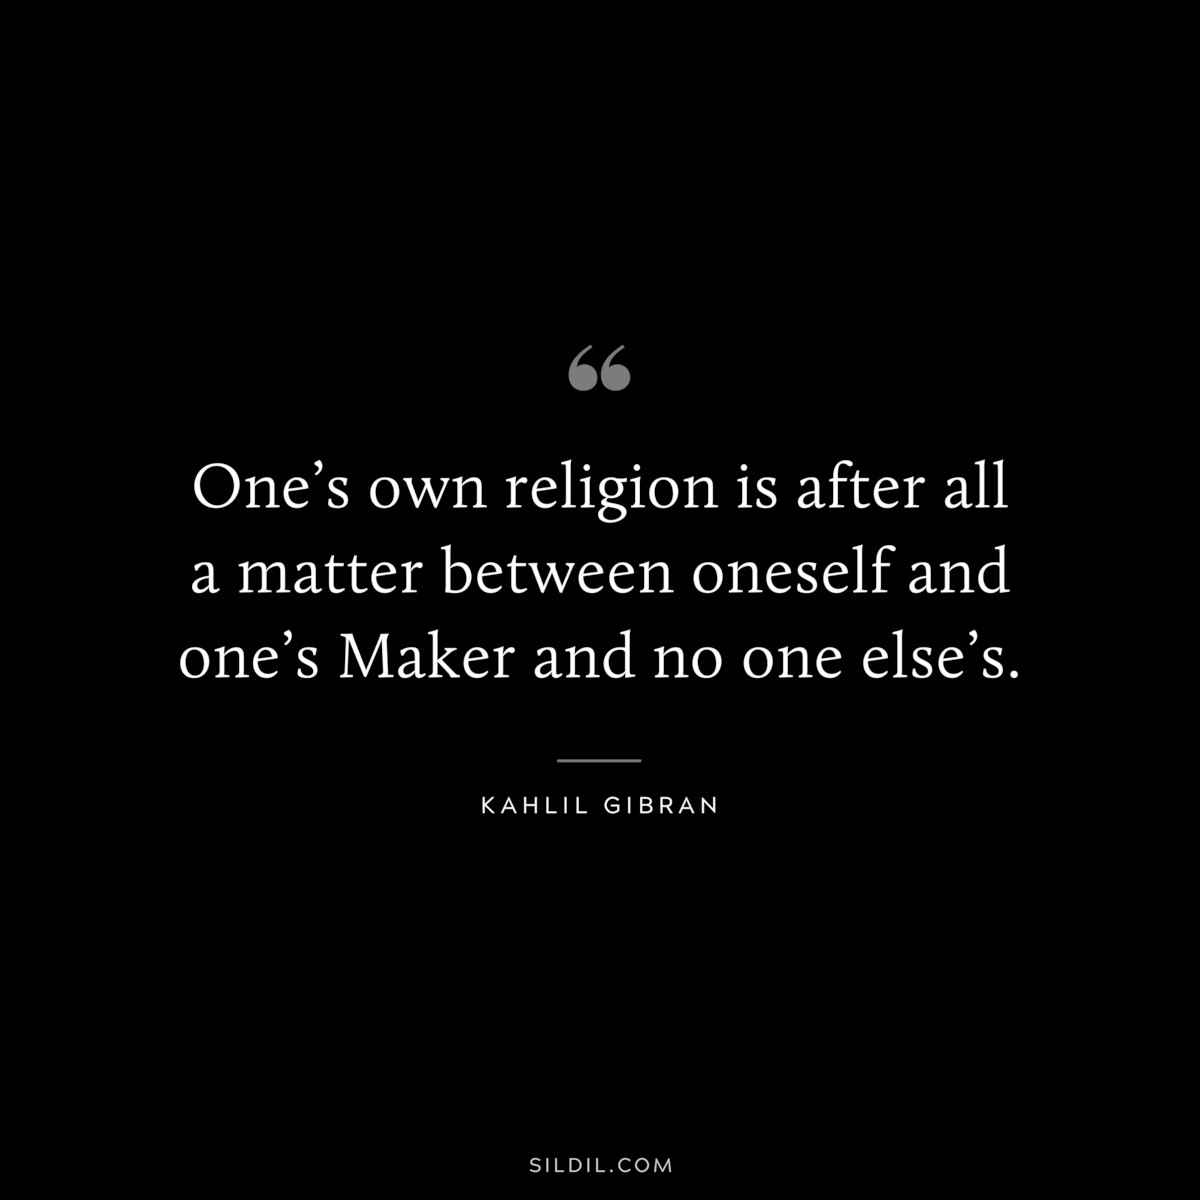 One’s own religion is after all a matter between oneself and one’s Maker and no one else’s. ― Kahlil Gibran